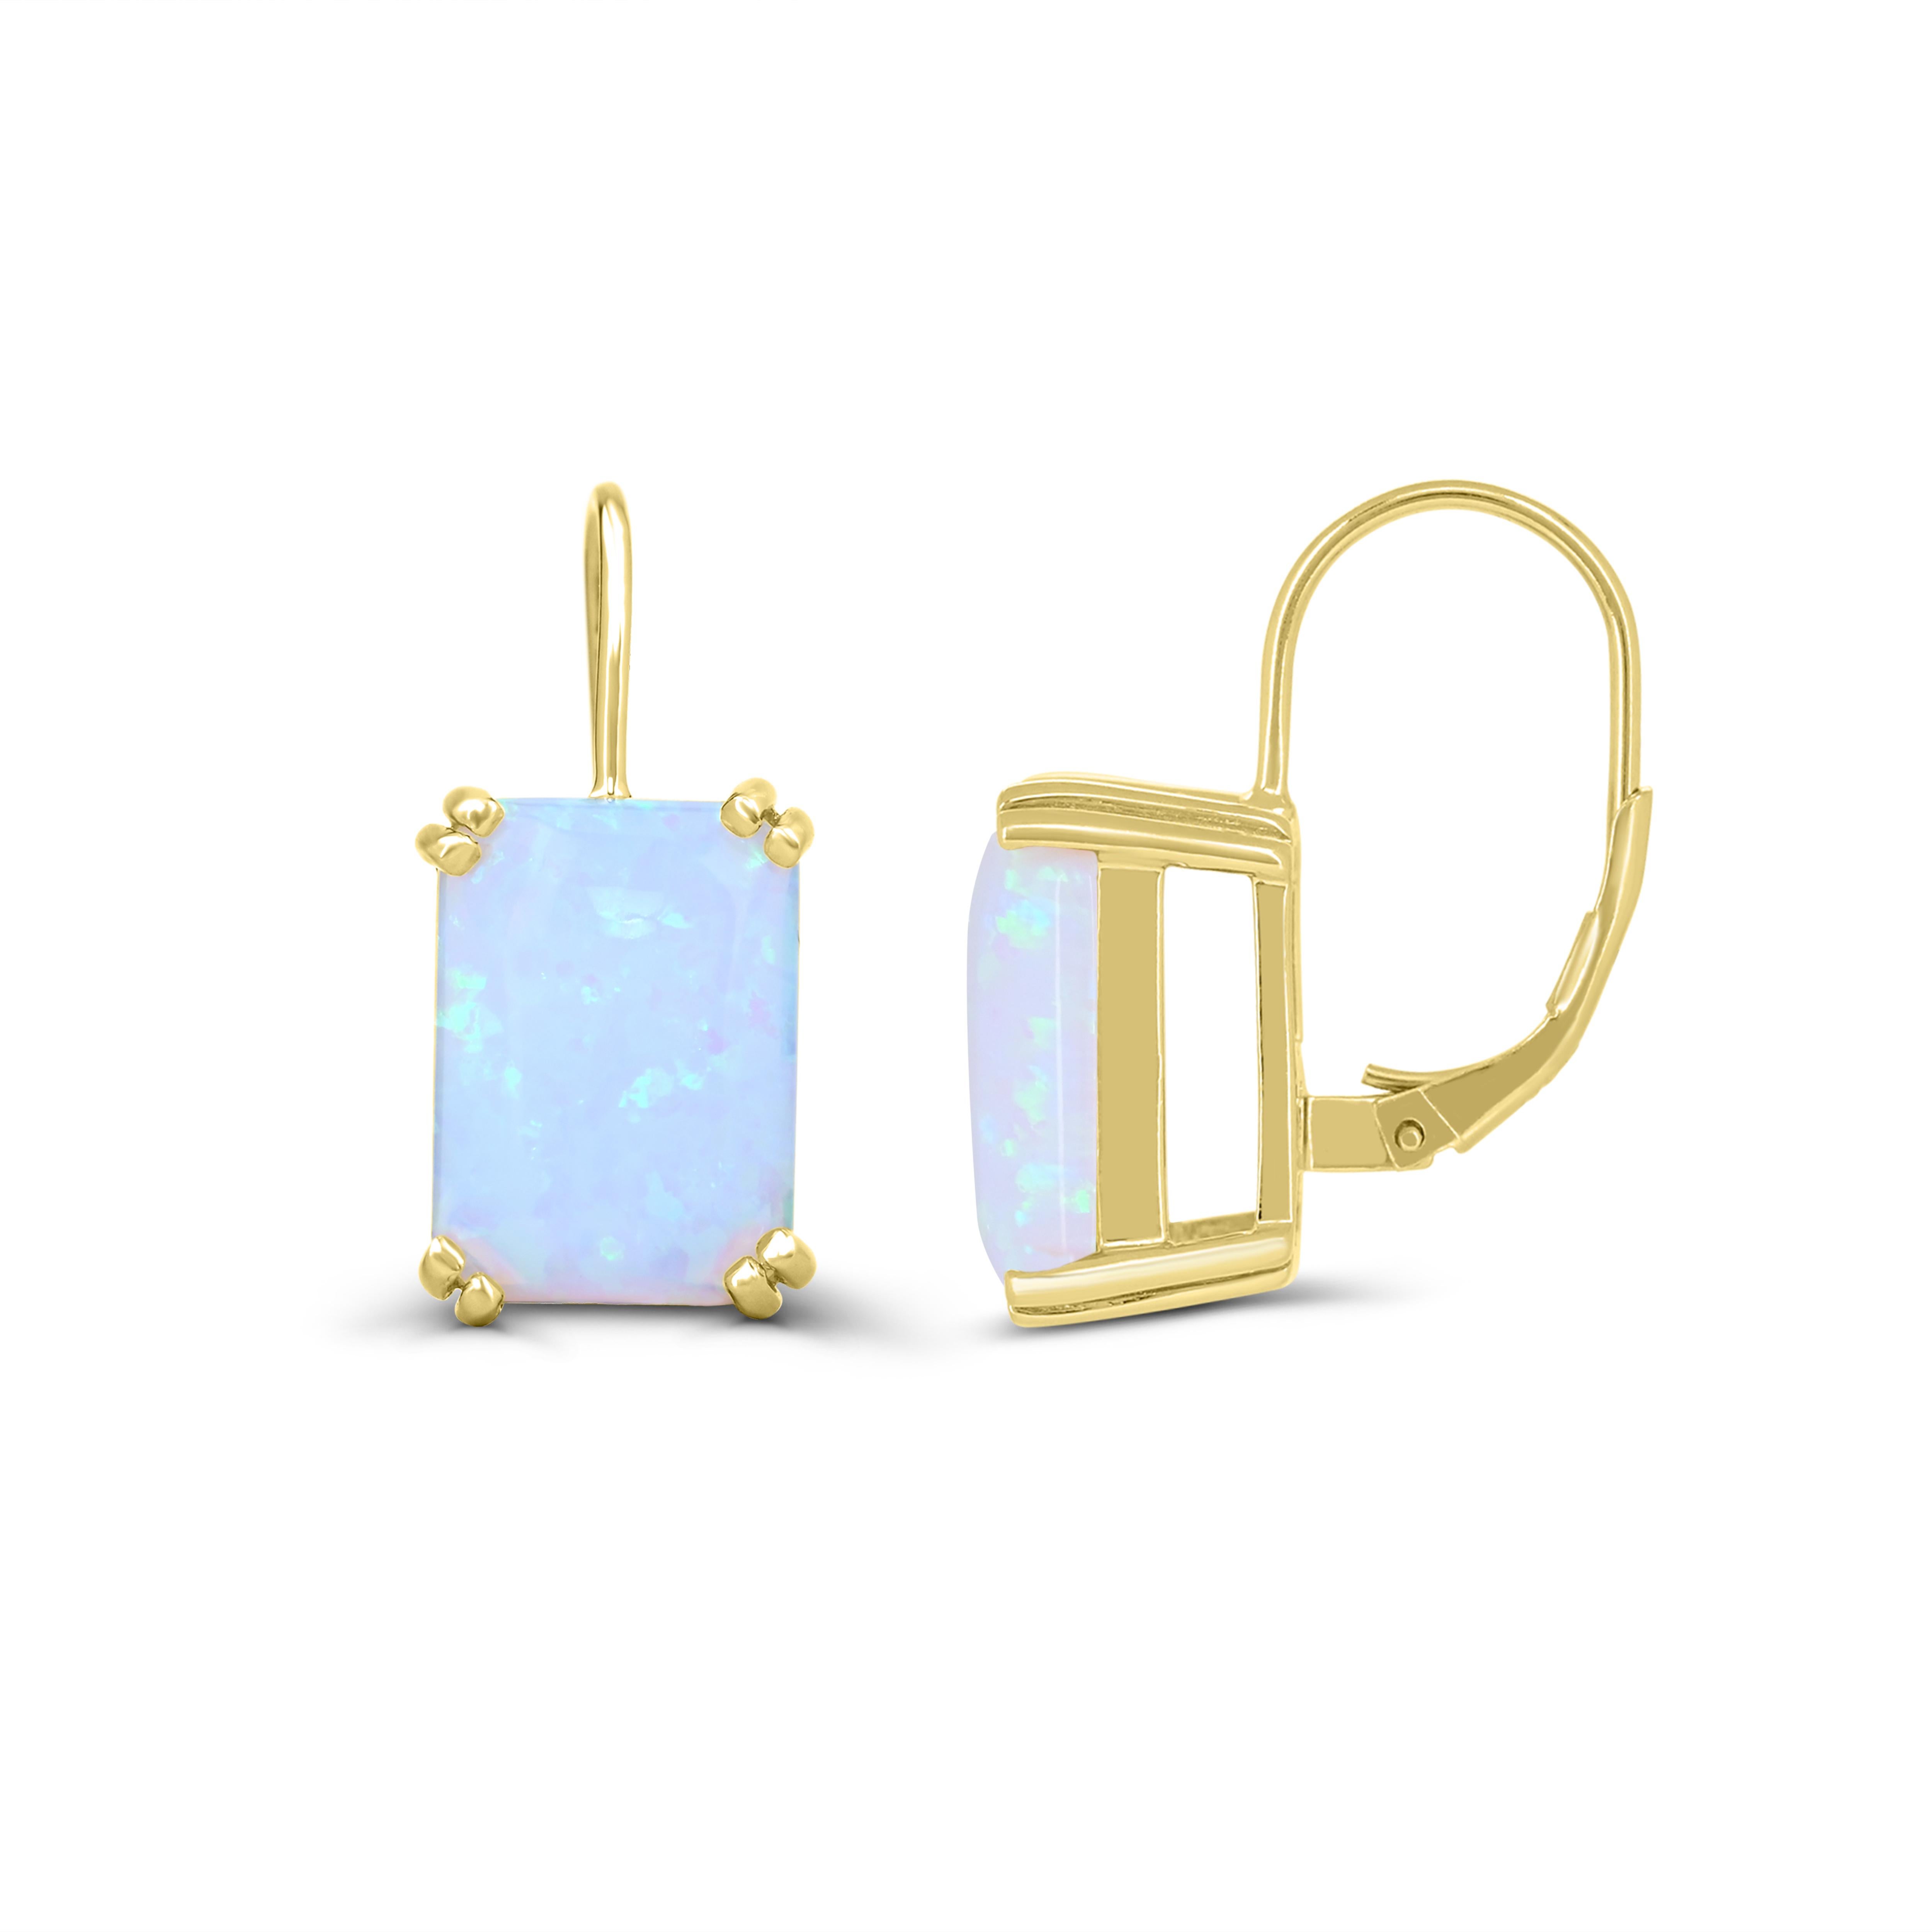 Each of these elegant earrings crafted from 14K yellow gold over sterling silver and features emerald-cut created opal that exude elegance and sophistication. With convenient lever back closures, these earrings are stunning and secure. Make a